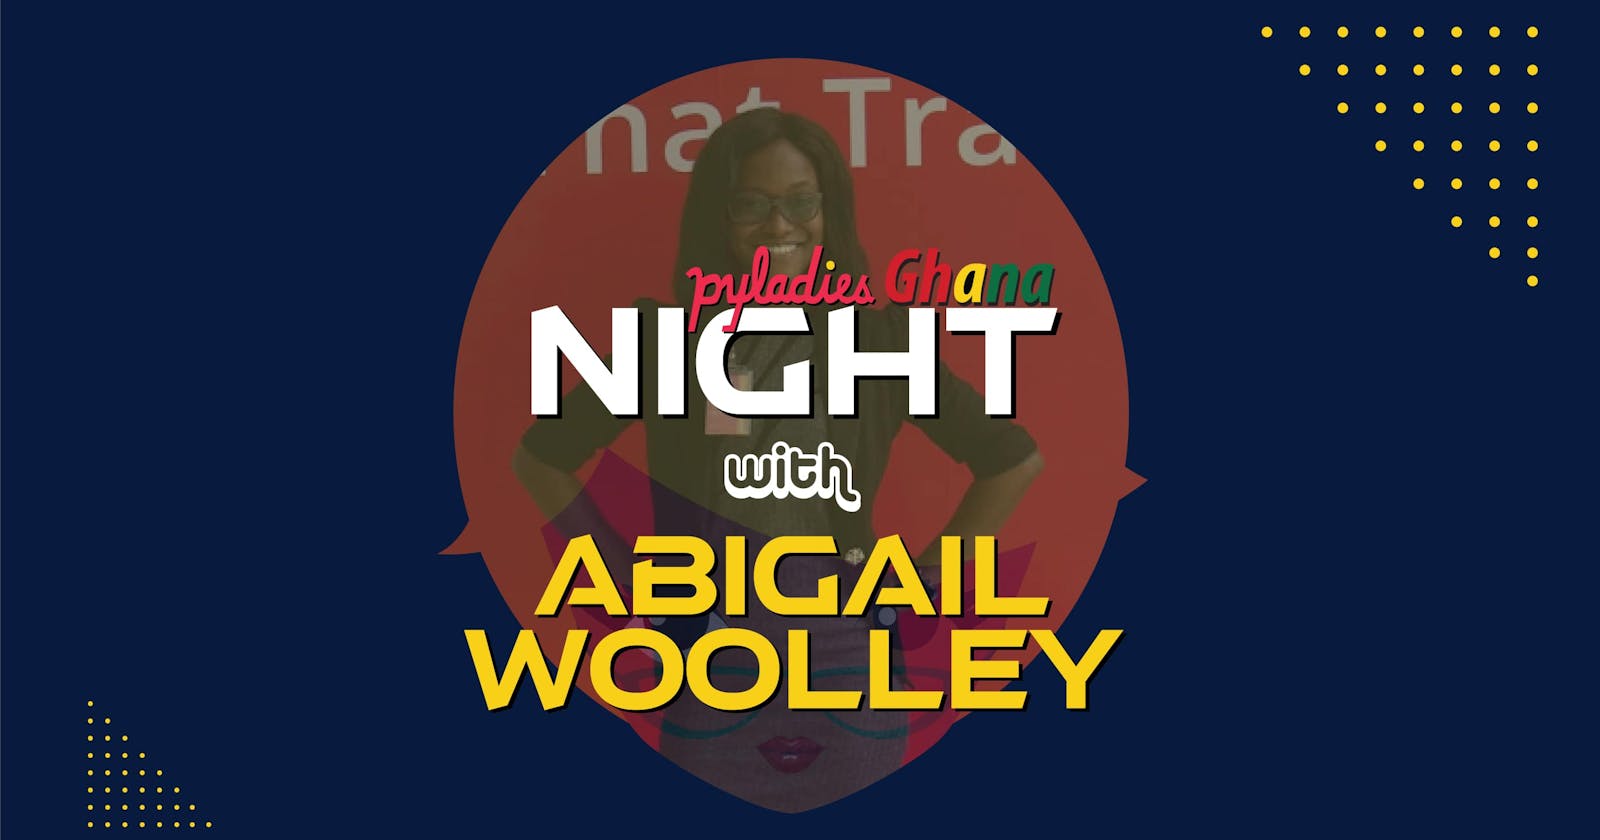 PyLadies Night with Abigail Woolley - Topic: Imposter Syndrome